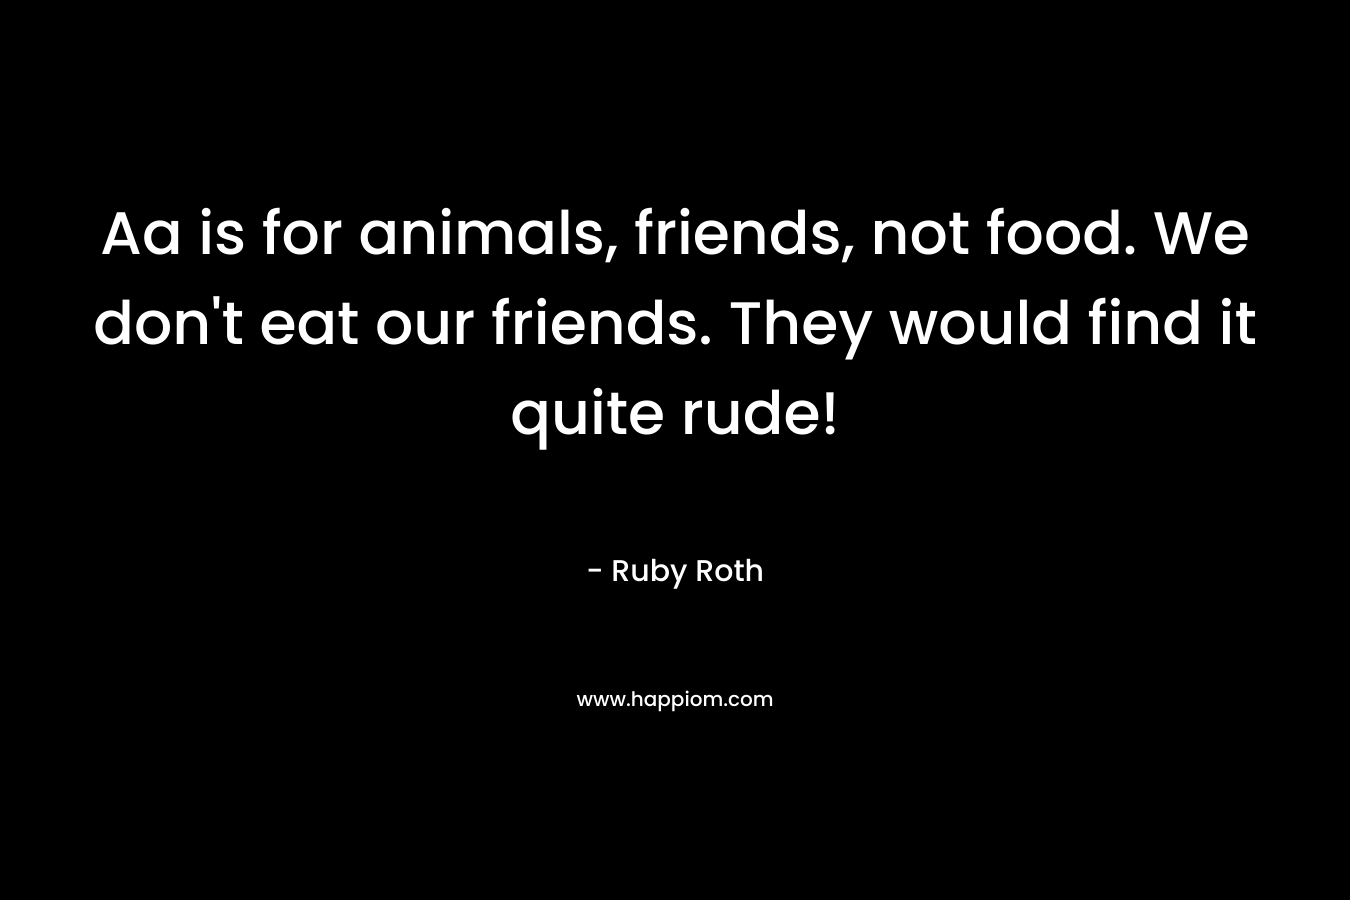 Aa is for animals, friends, not food. We don’t eat our friends. They would find it quite rude! – Ruby Roth